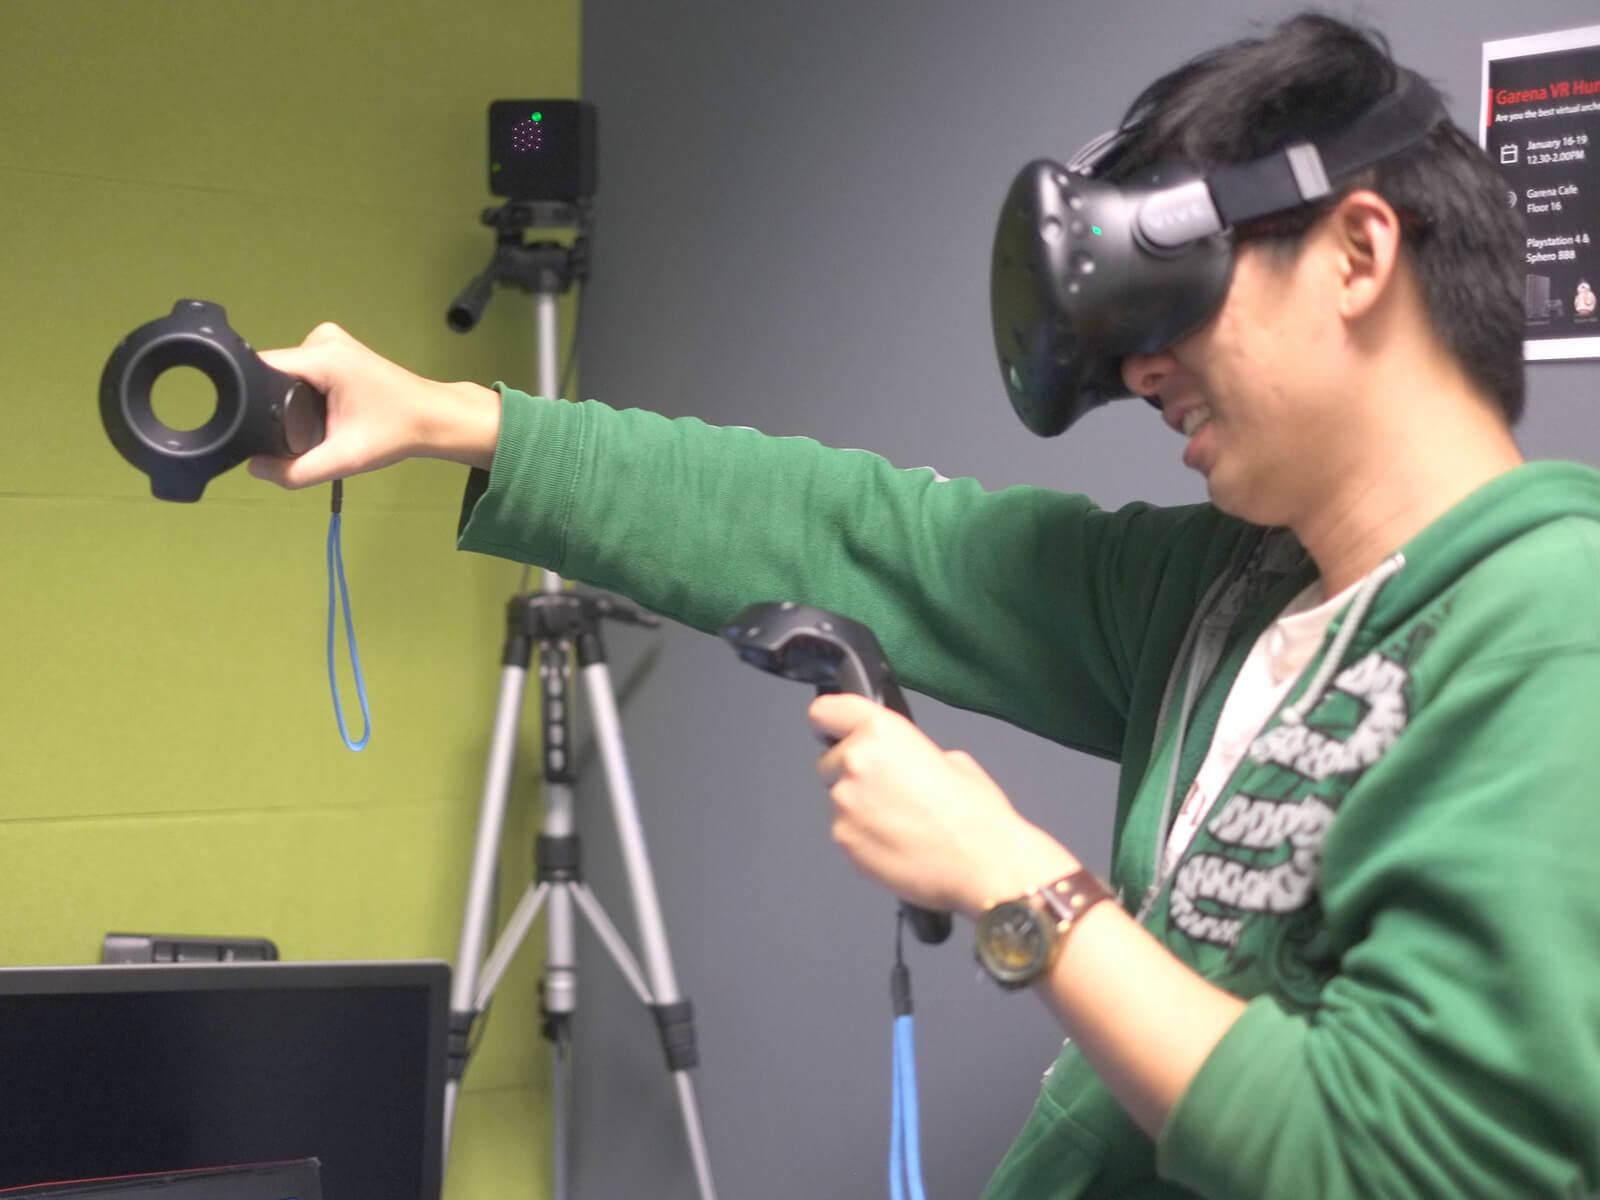 Side view of DigiPen graduate Sim Wei Jin using a VR headset and extending his right arm while using hand-motion controls